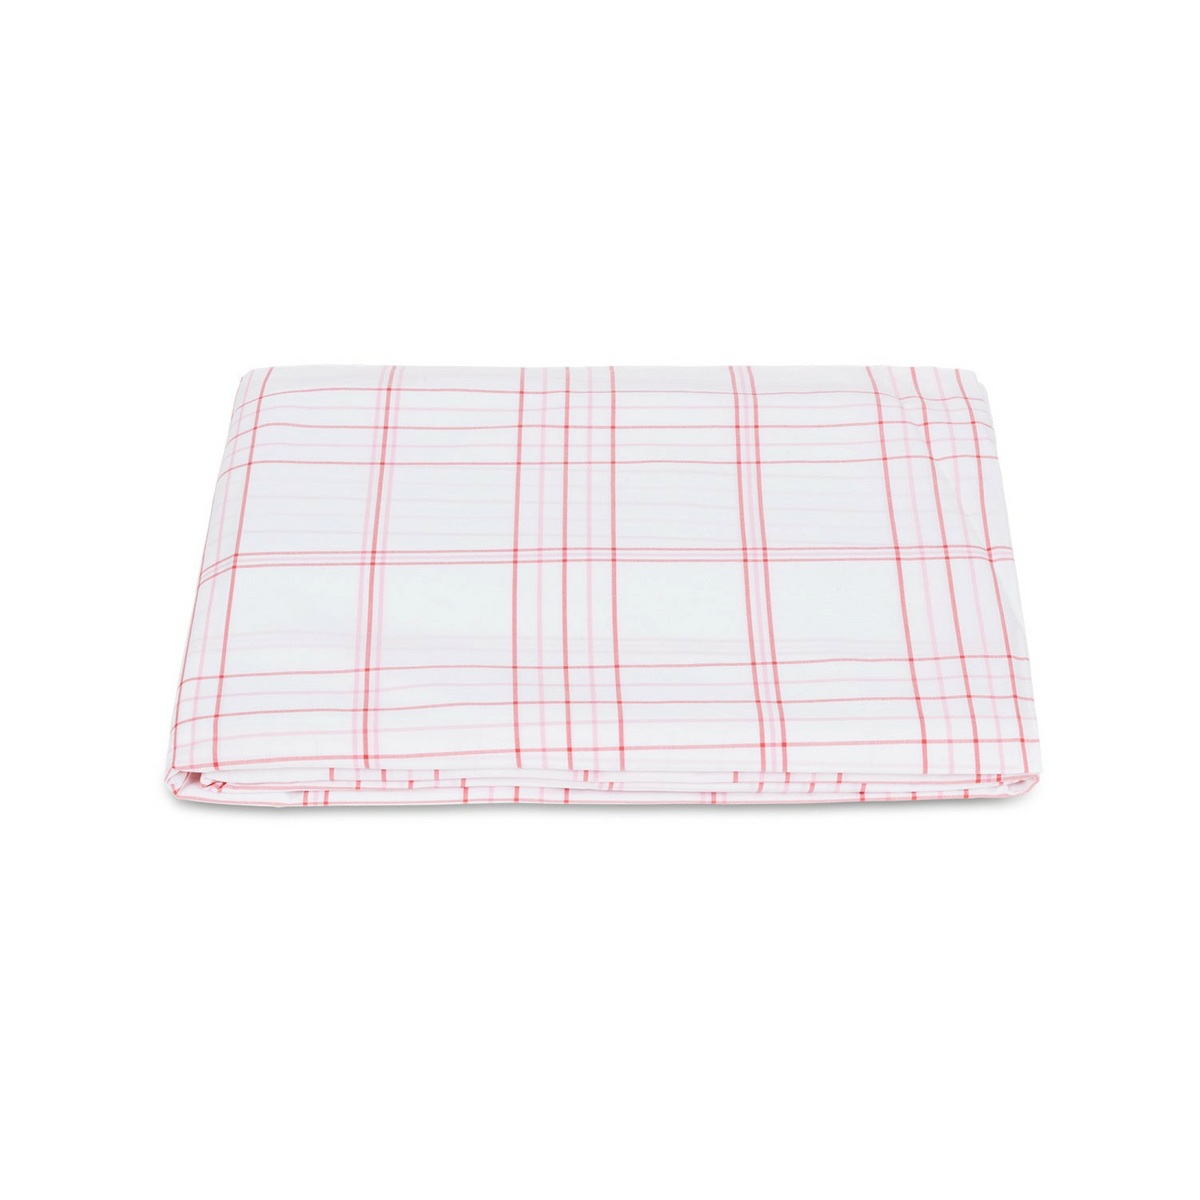 Matouk August Plaid Bedding Fitted Sheet Pink Fine Linens